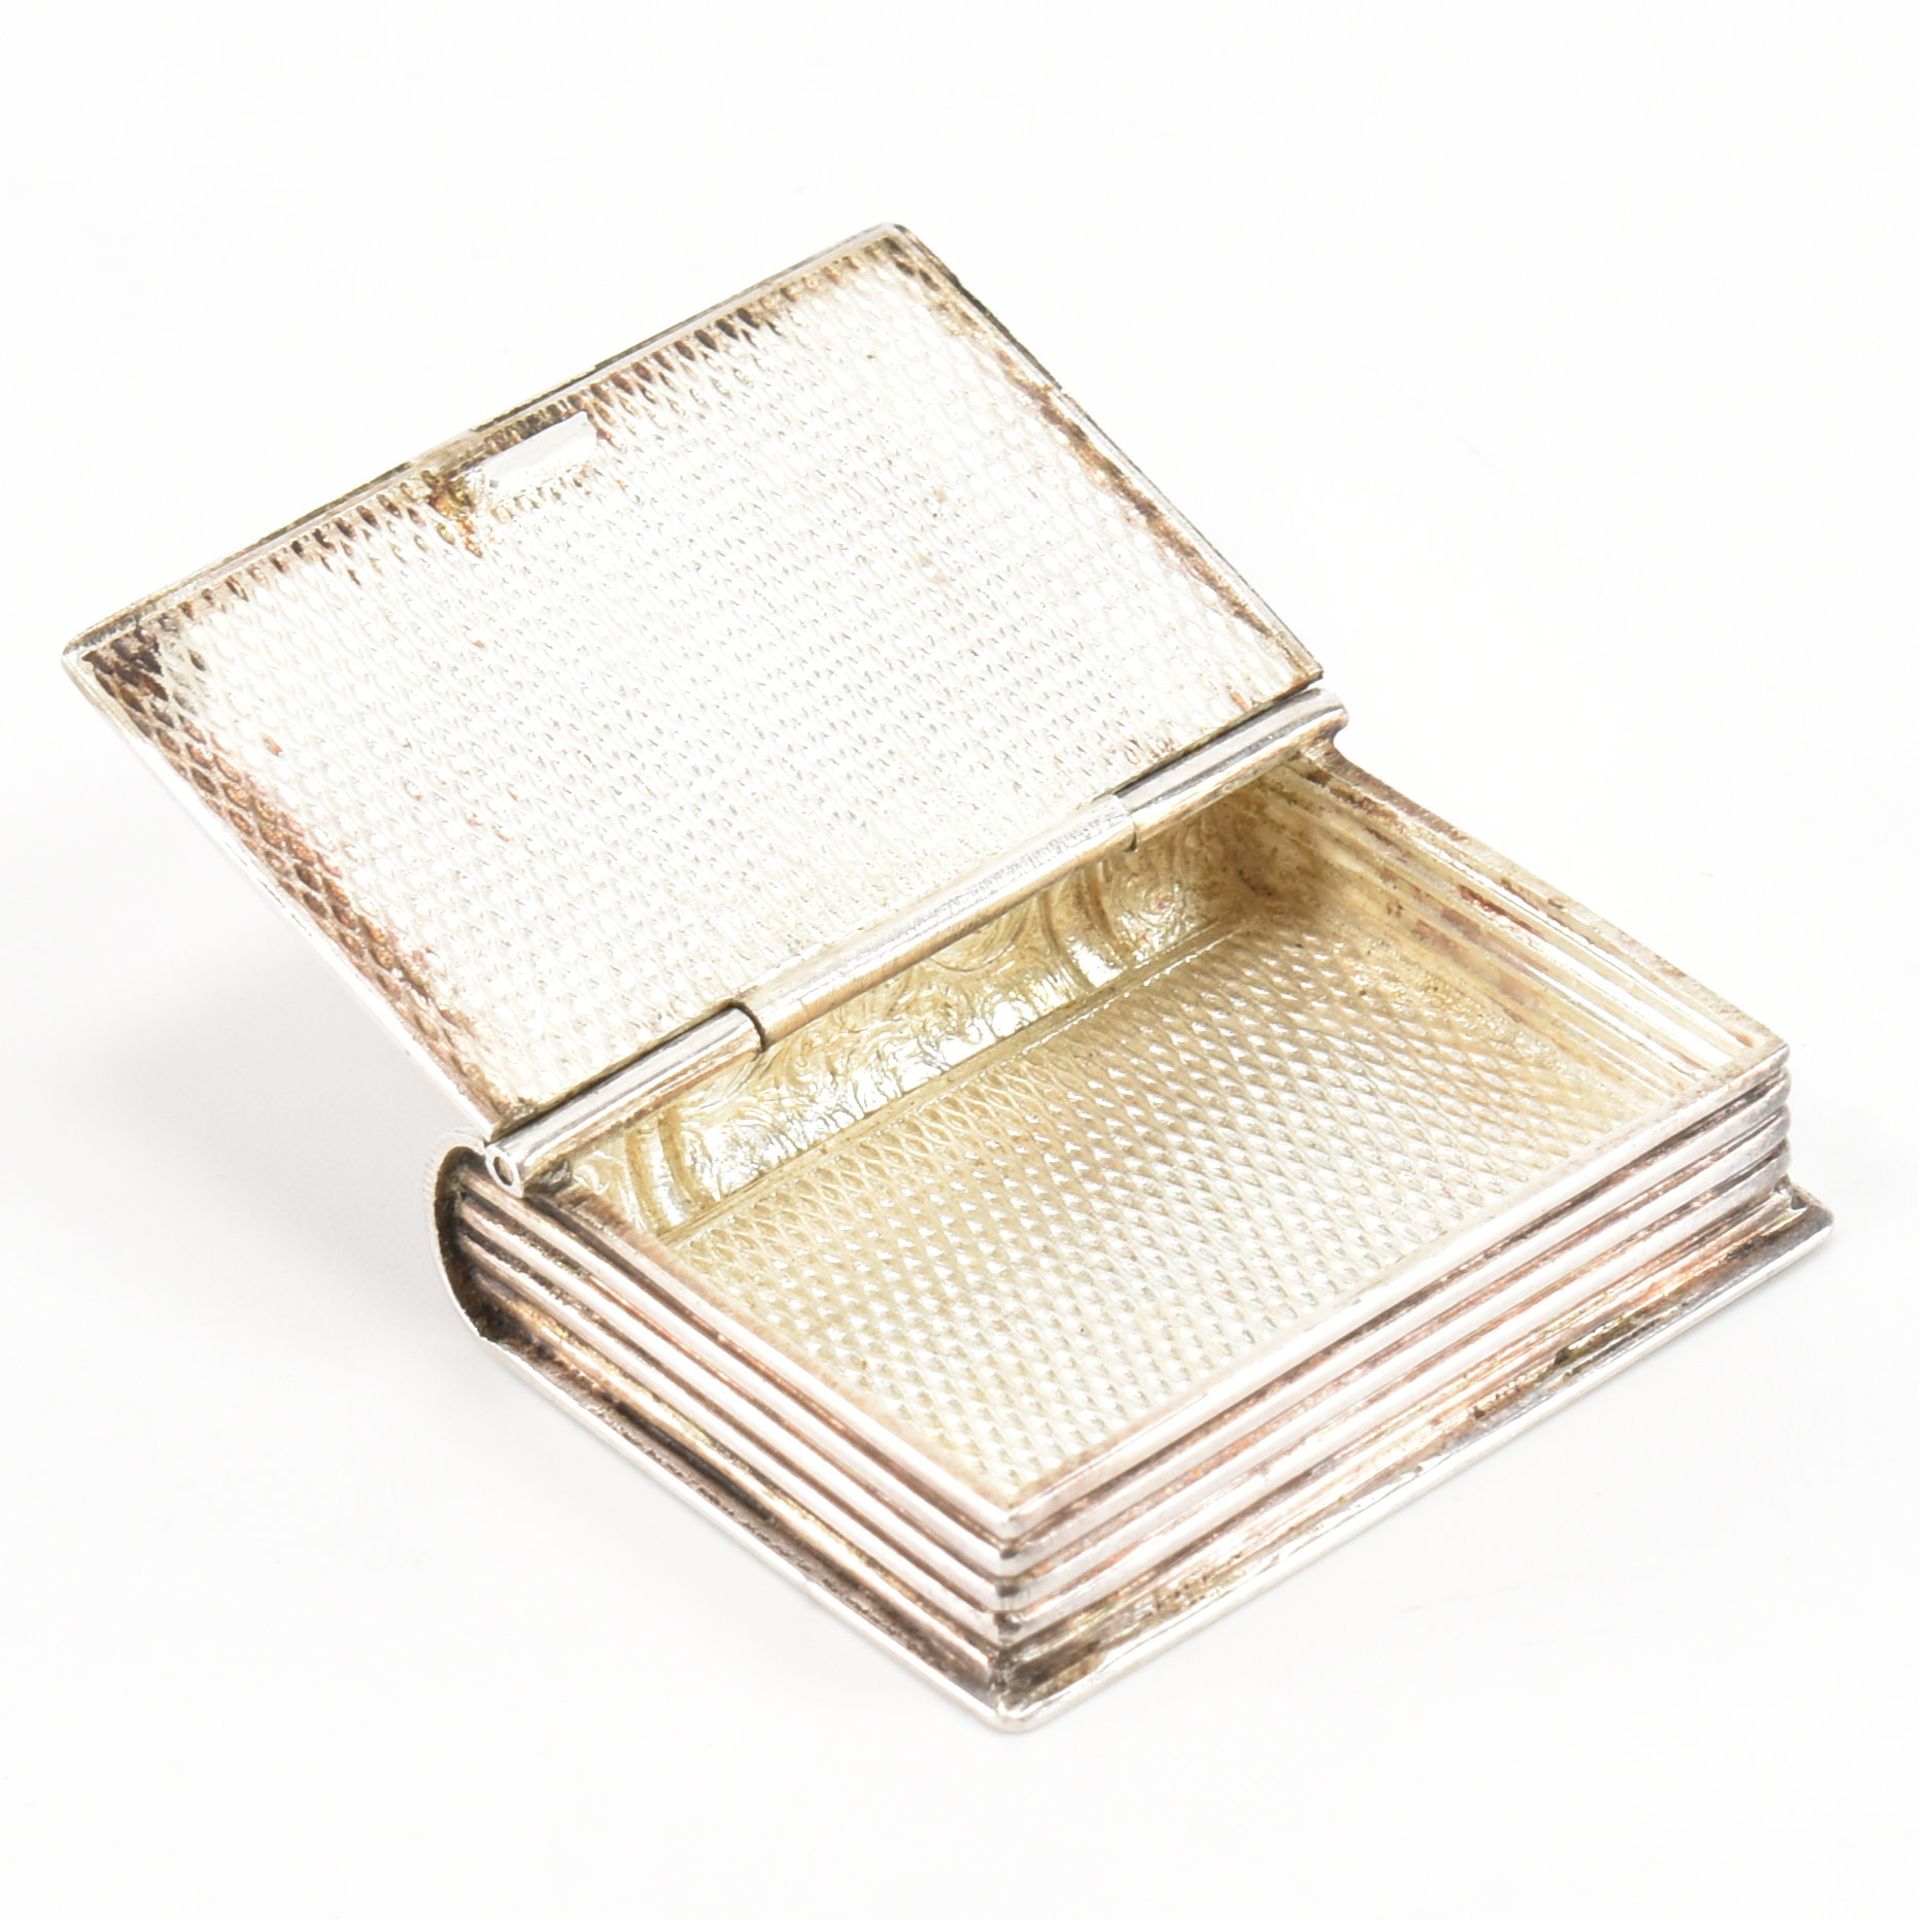 SILVER PLATED SNUFF BOX IN THE FORM OF A BOOK - Image 2 of 3